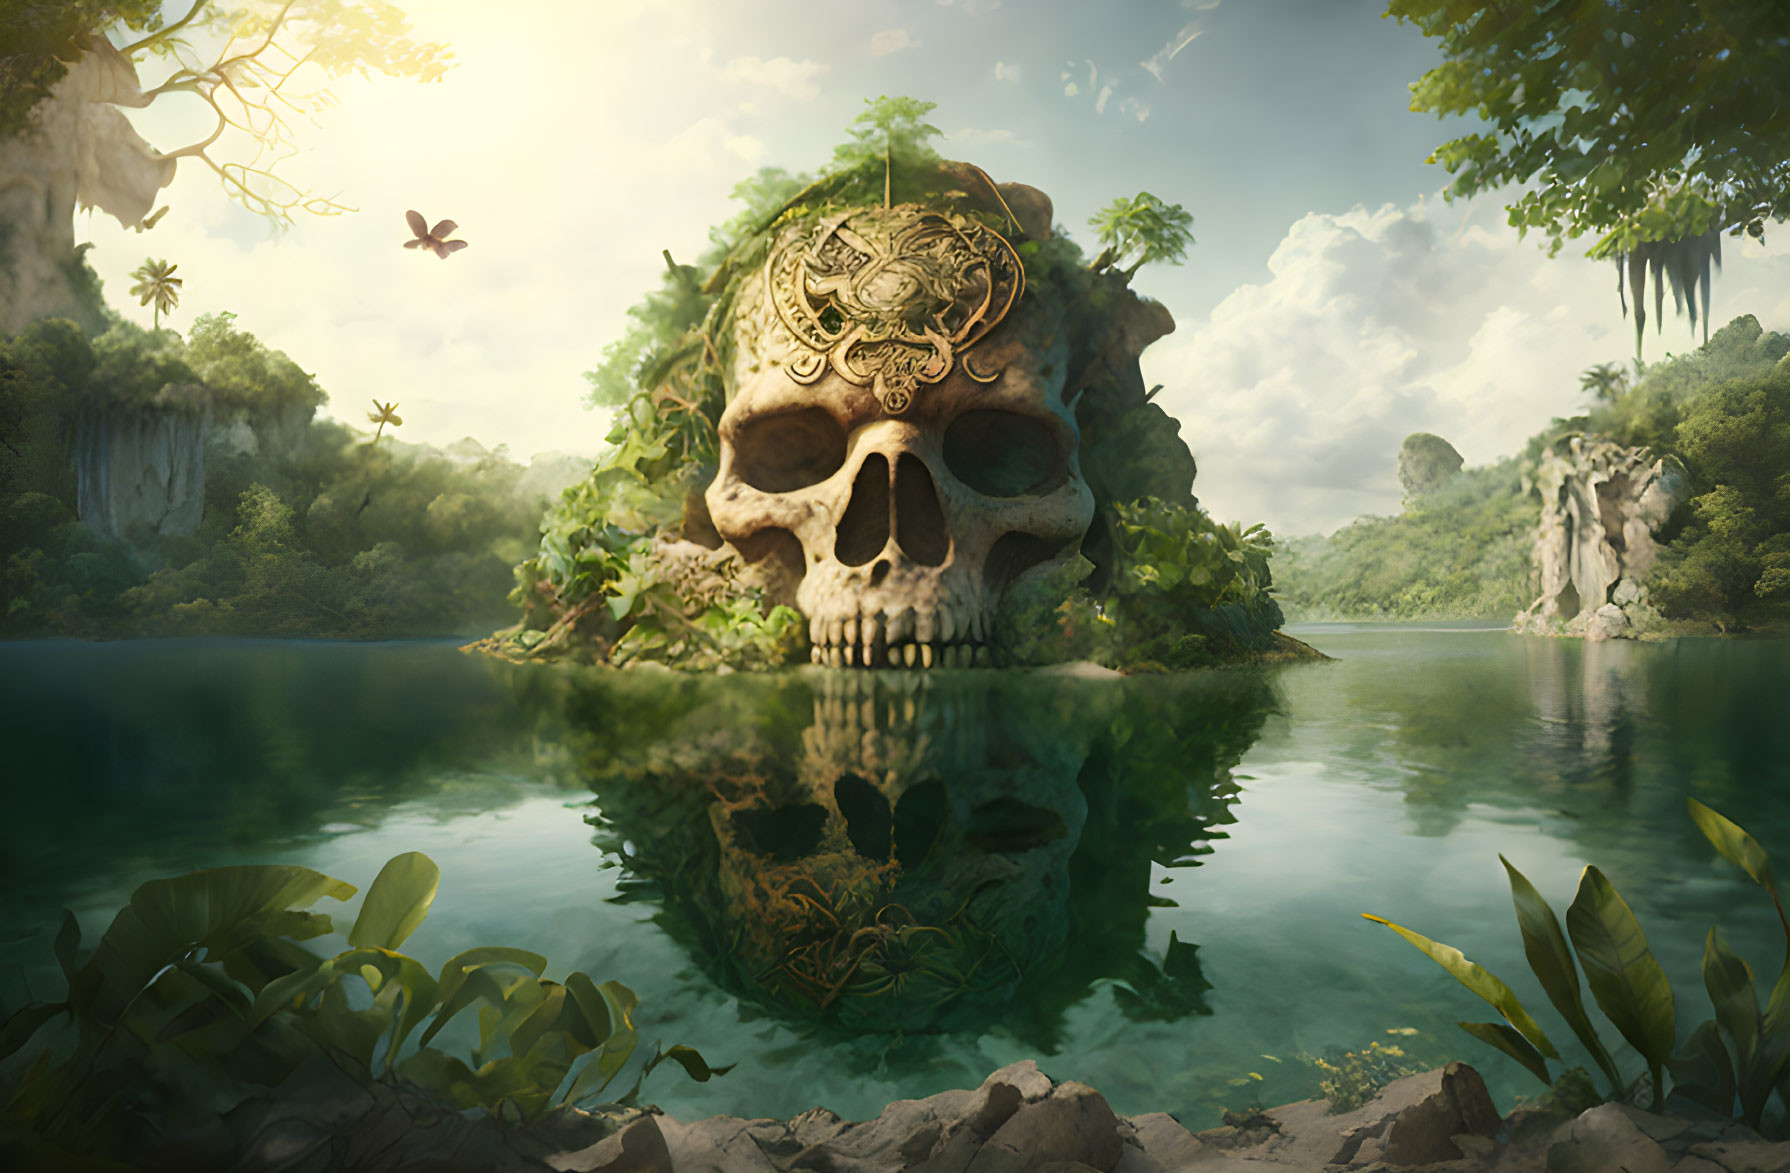 Ornate skull in tranquil lake with tropical foliage